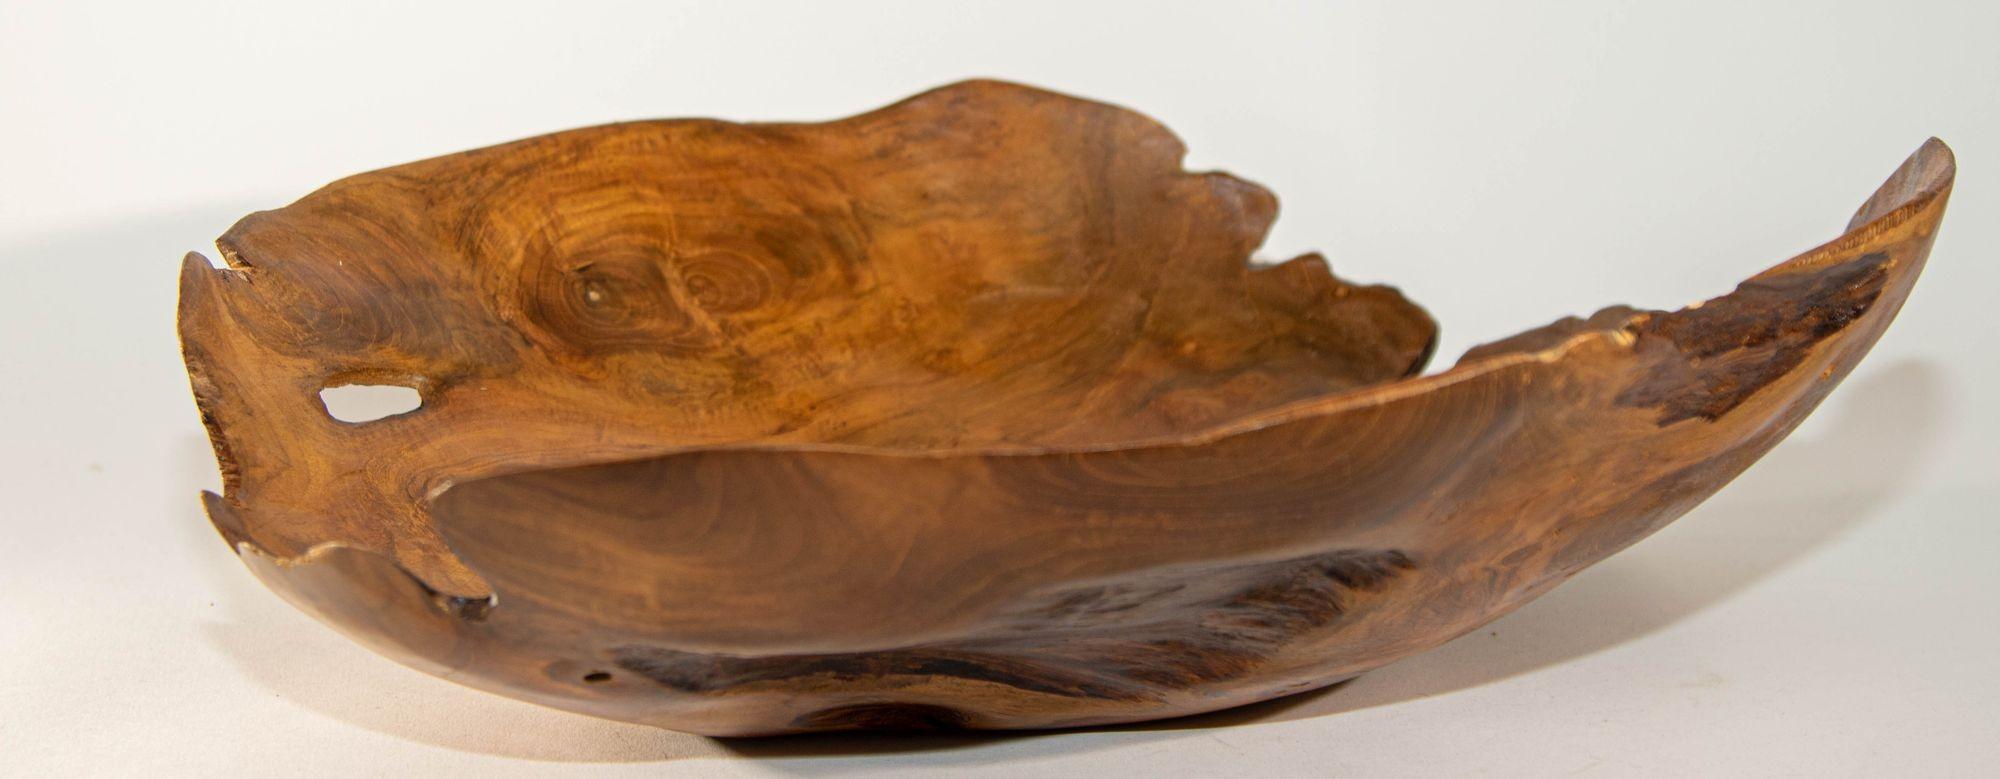 Vintage Organic unique scpted teak burl wood root fruit bowl.Large Organic Natural Free Form Live Edge Scptural Root Wood Bowl.A rustic teak burl wood bowl crafted on the island of Java, Indonesia with a shiny pished finish. The bowl burl wood